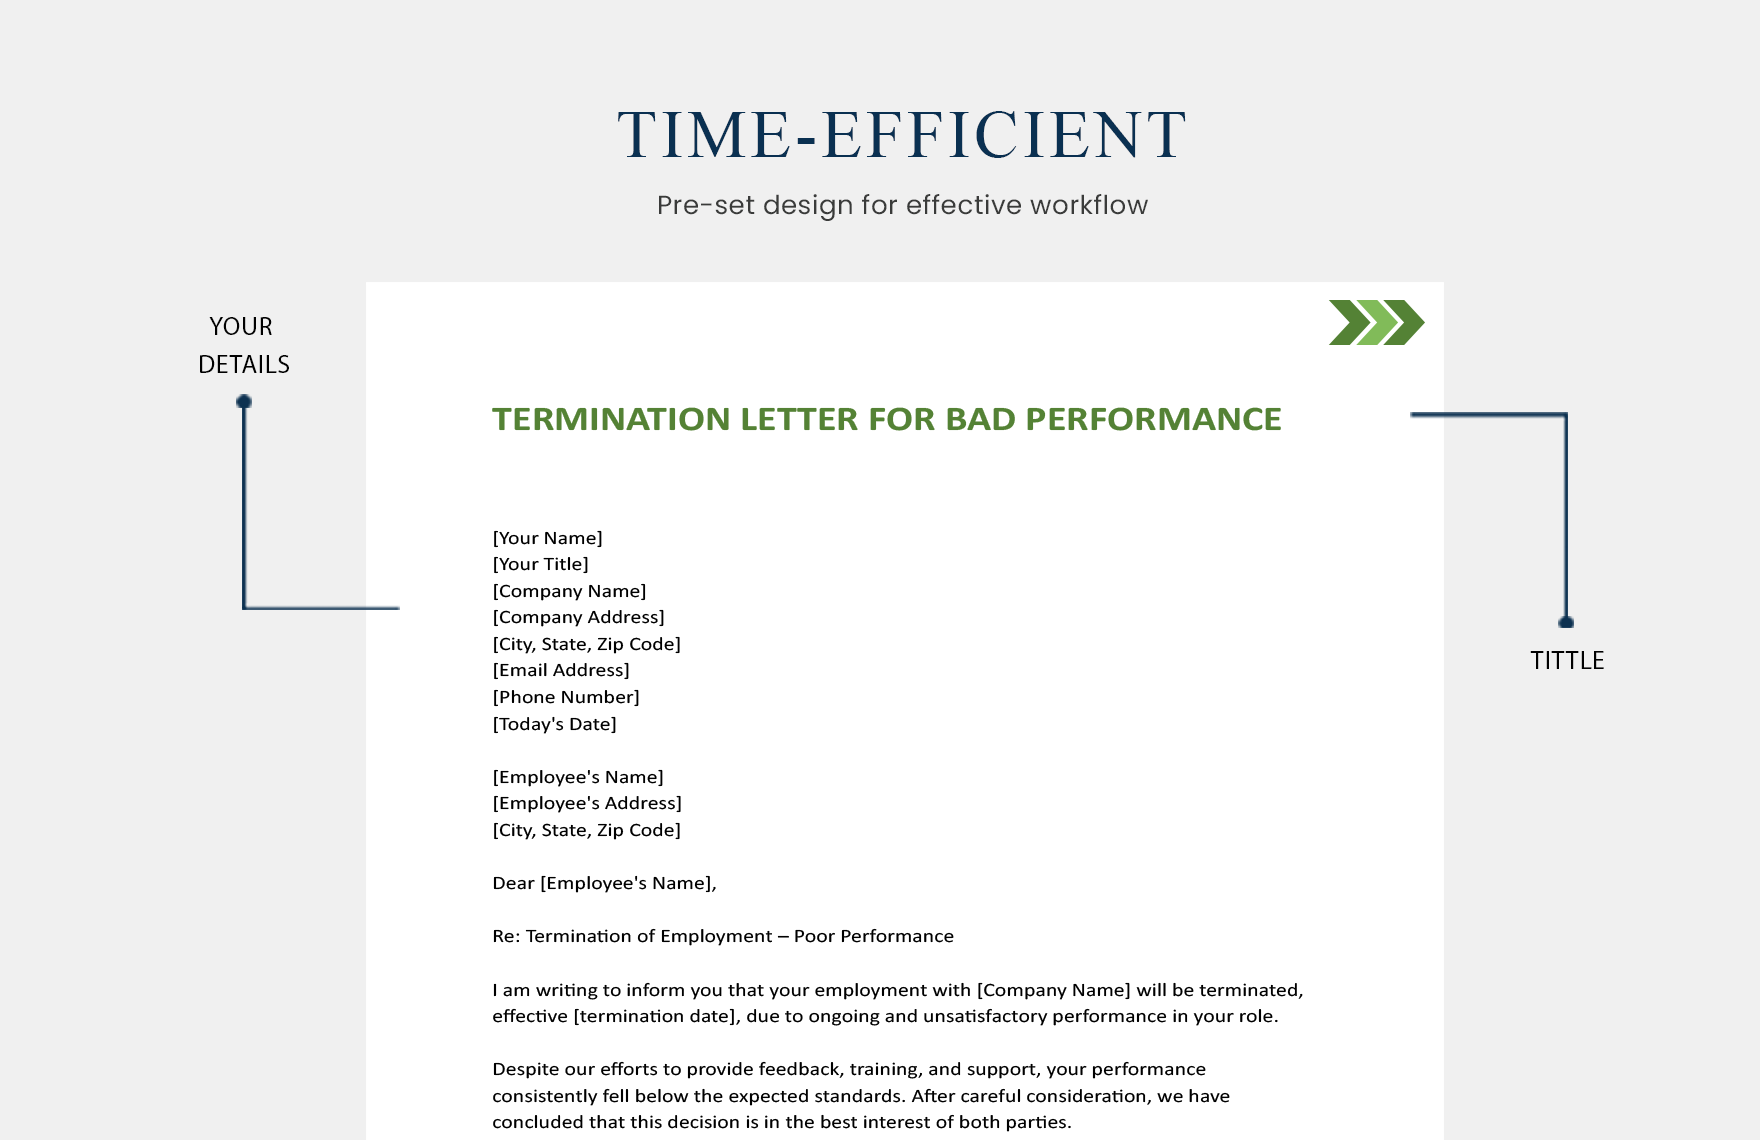 Termination Letter For Bad Performance